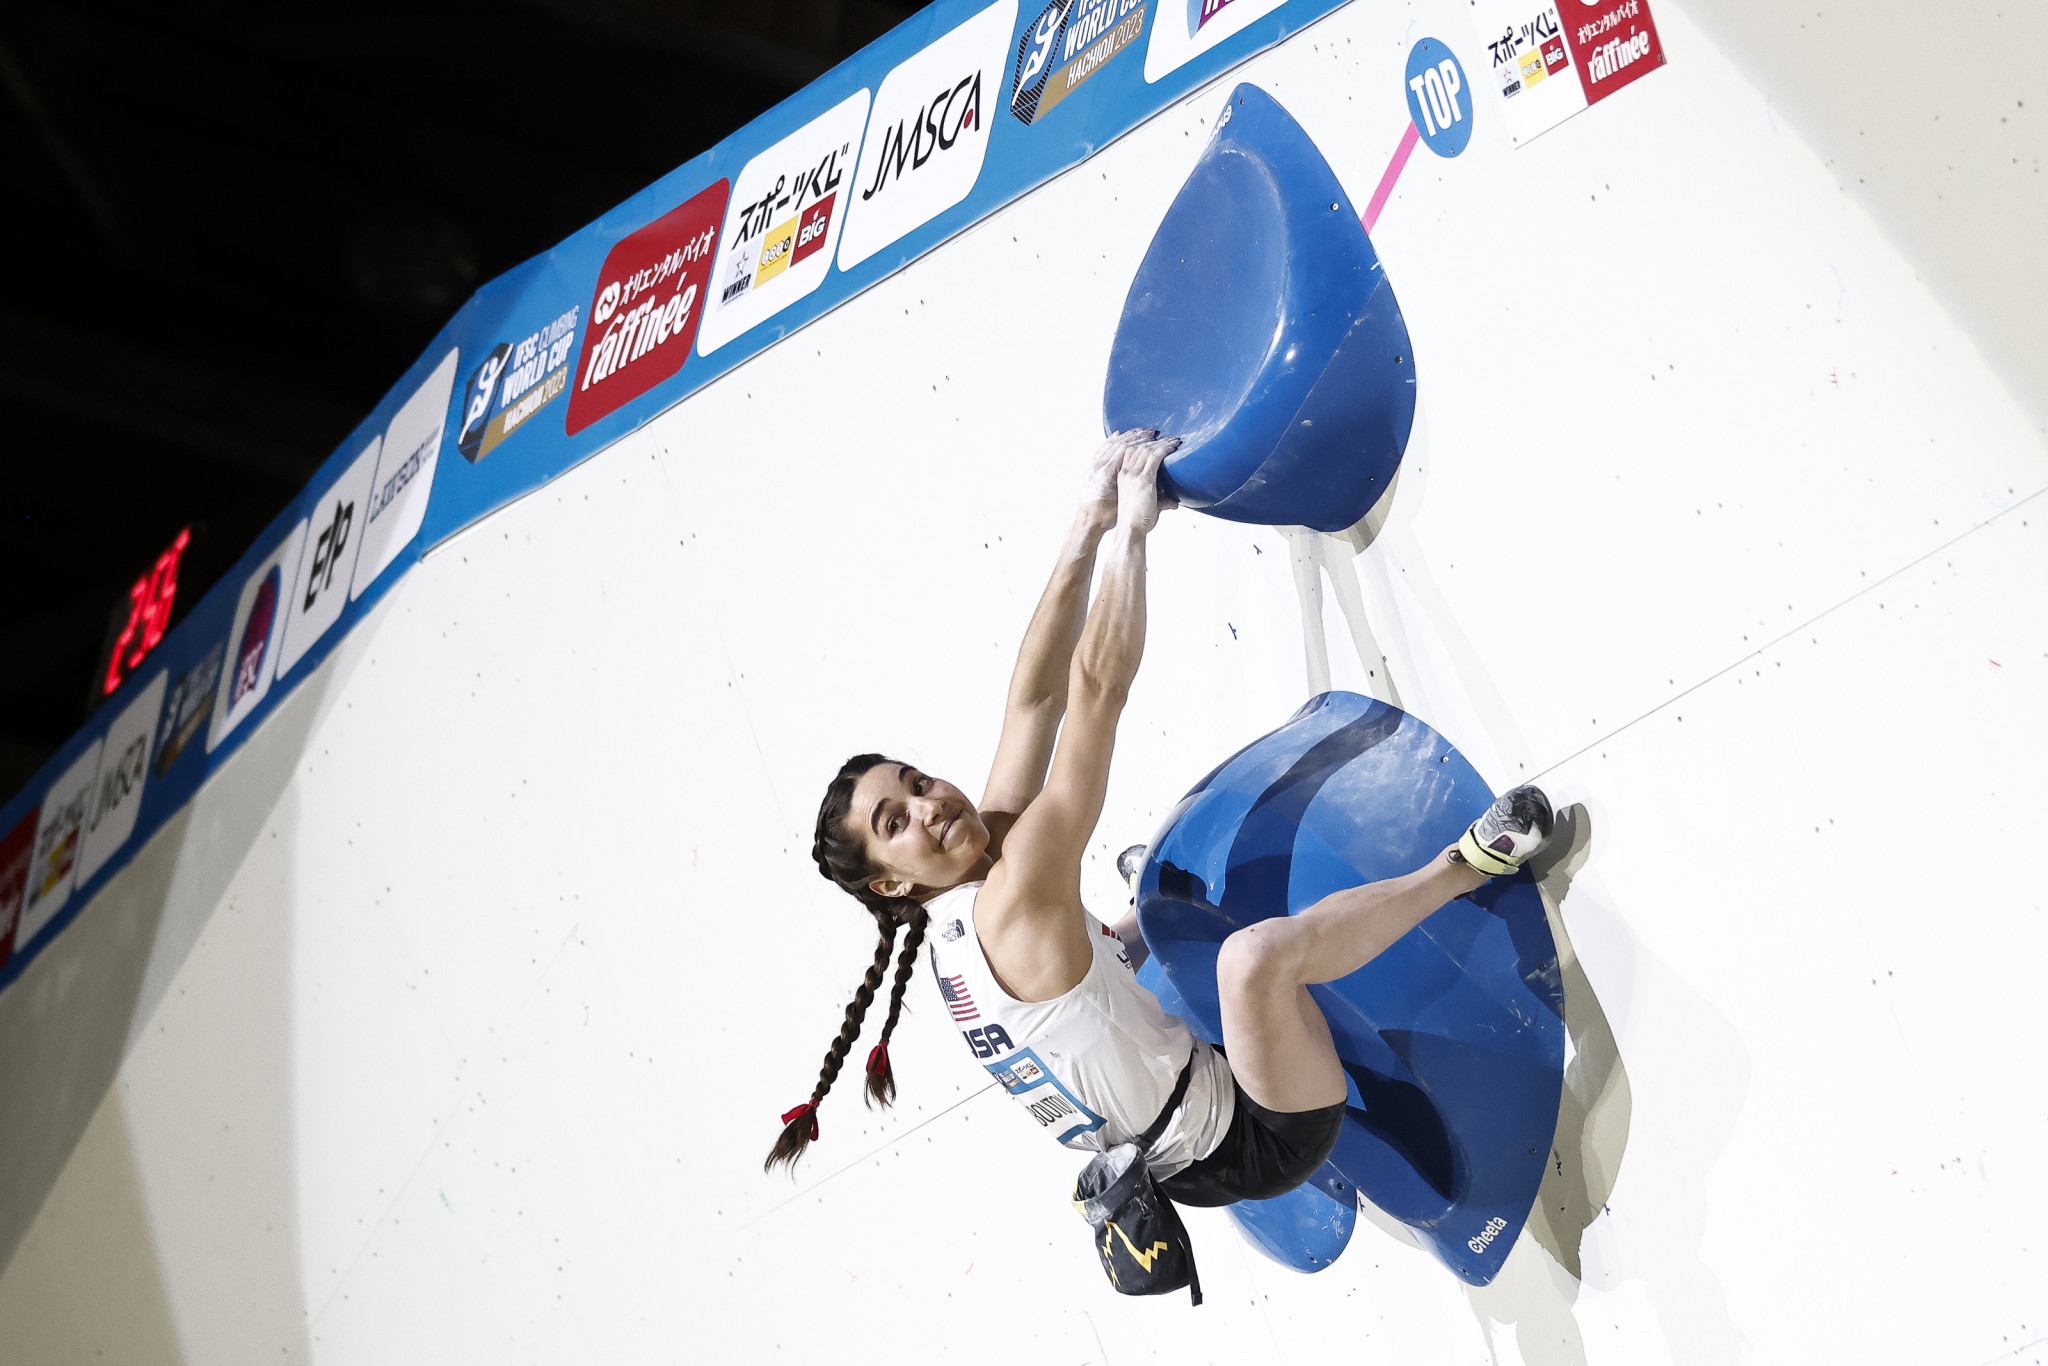 Schalck and Raboutou earn victories at first IFSC World Cup of season in Hachioji